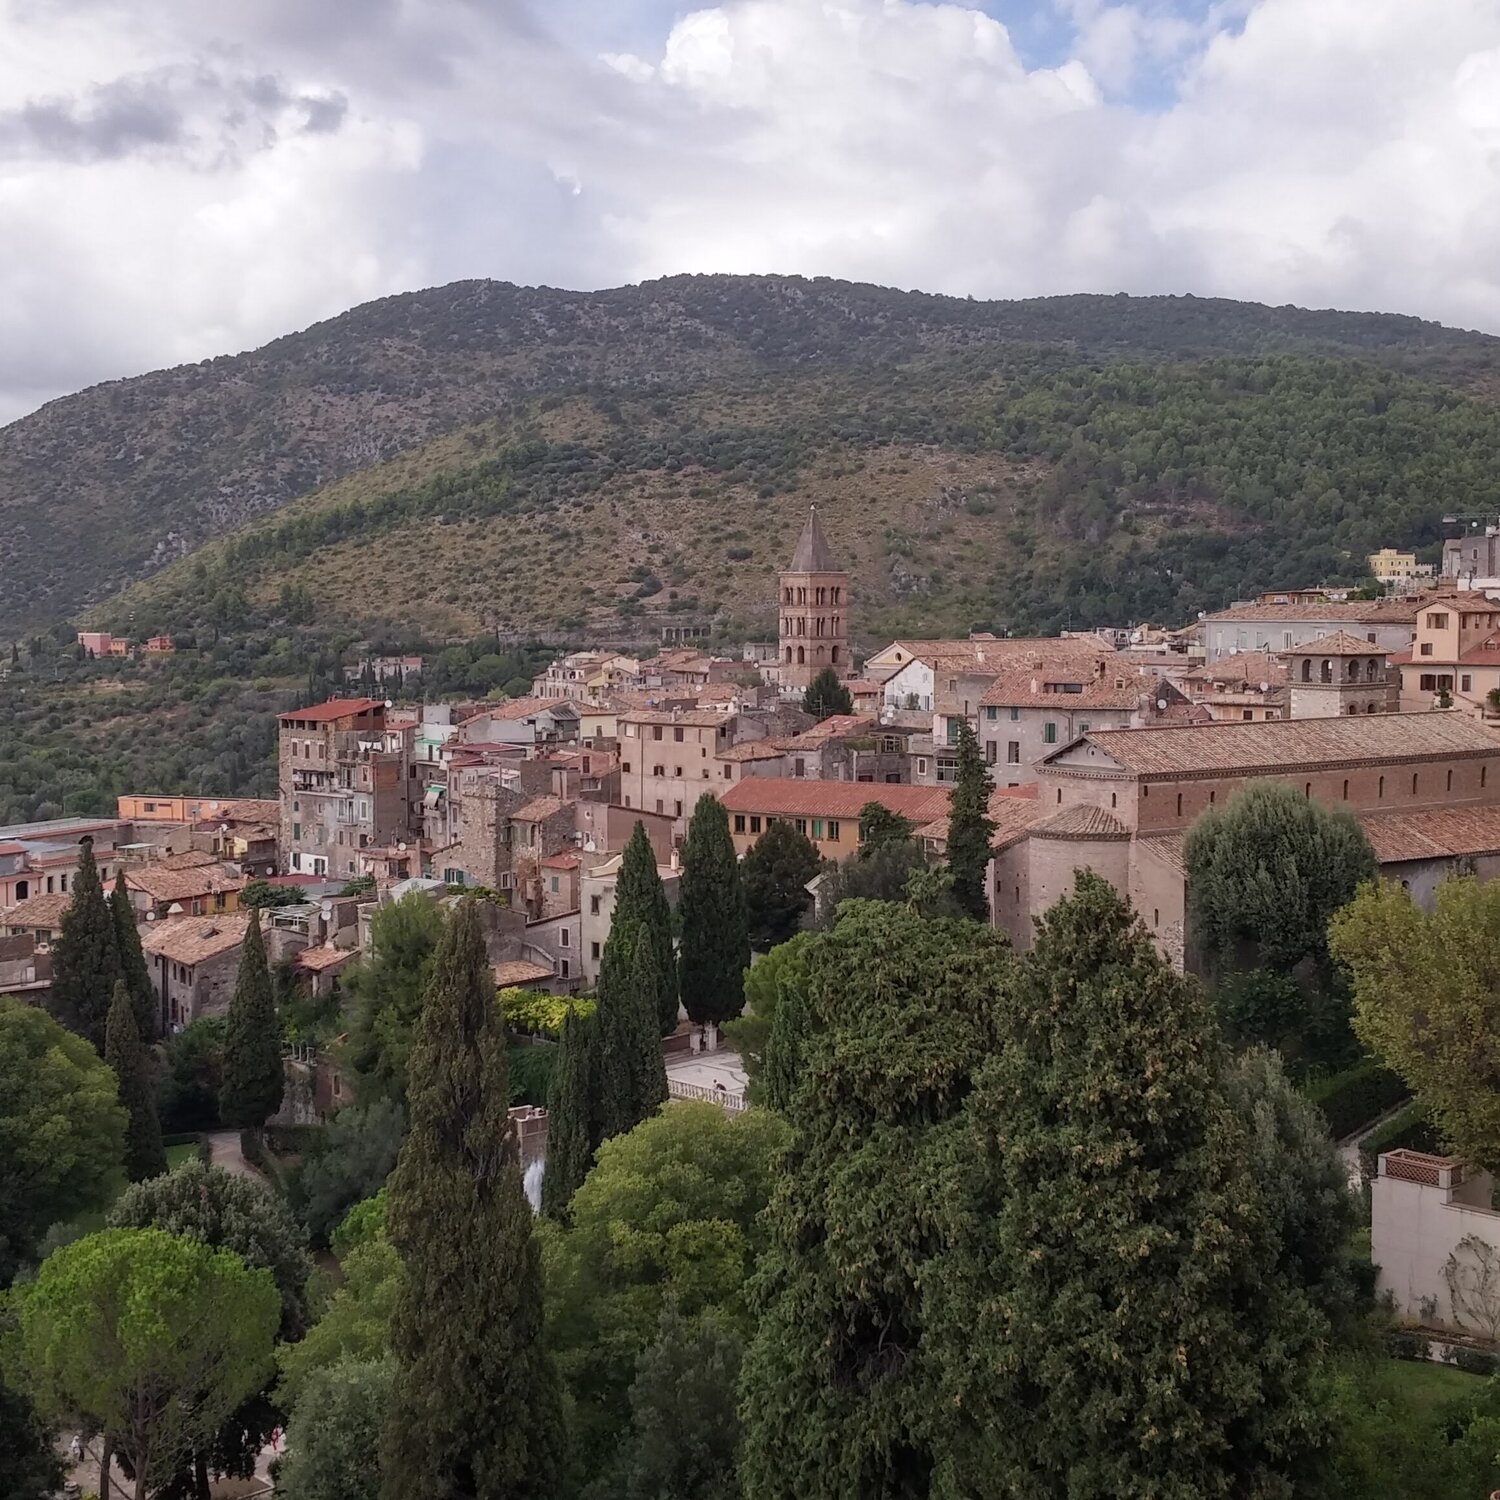 One day trip to Tivoli from Rome. How to get there and what to see.